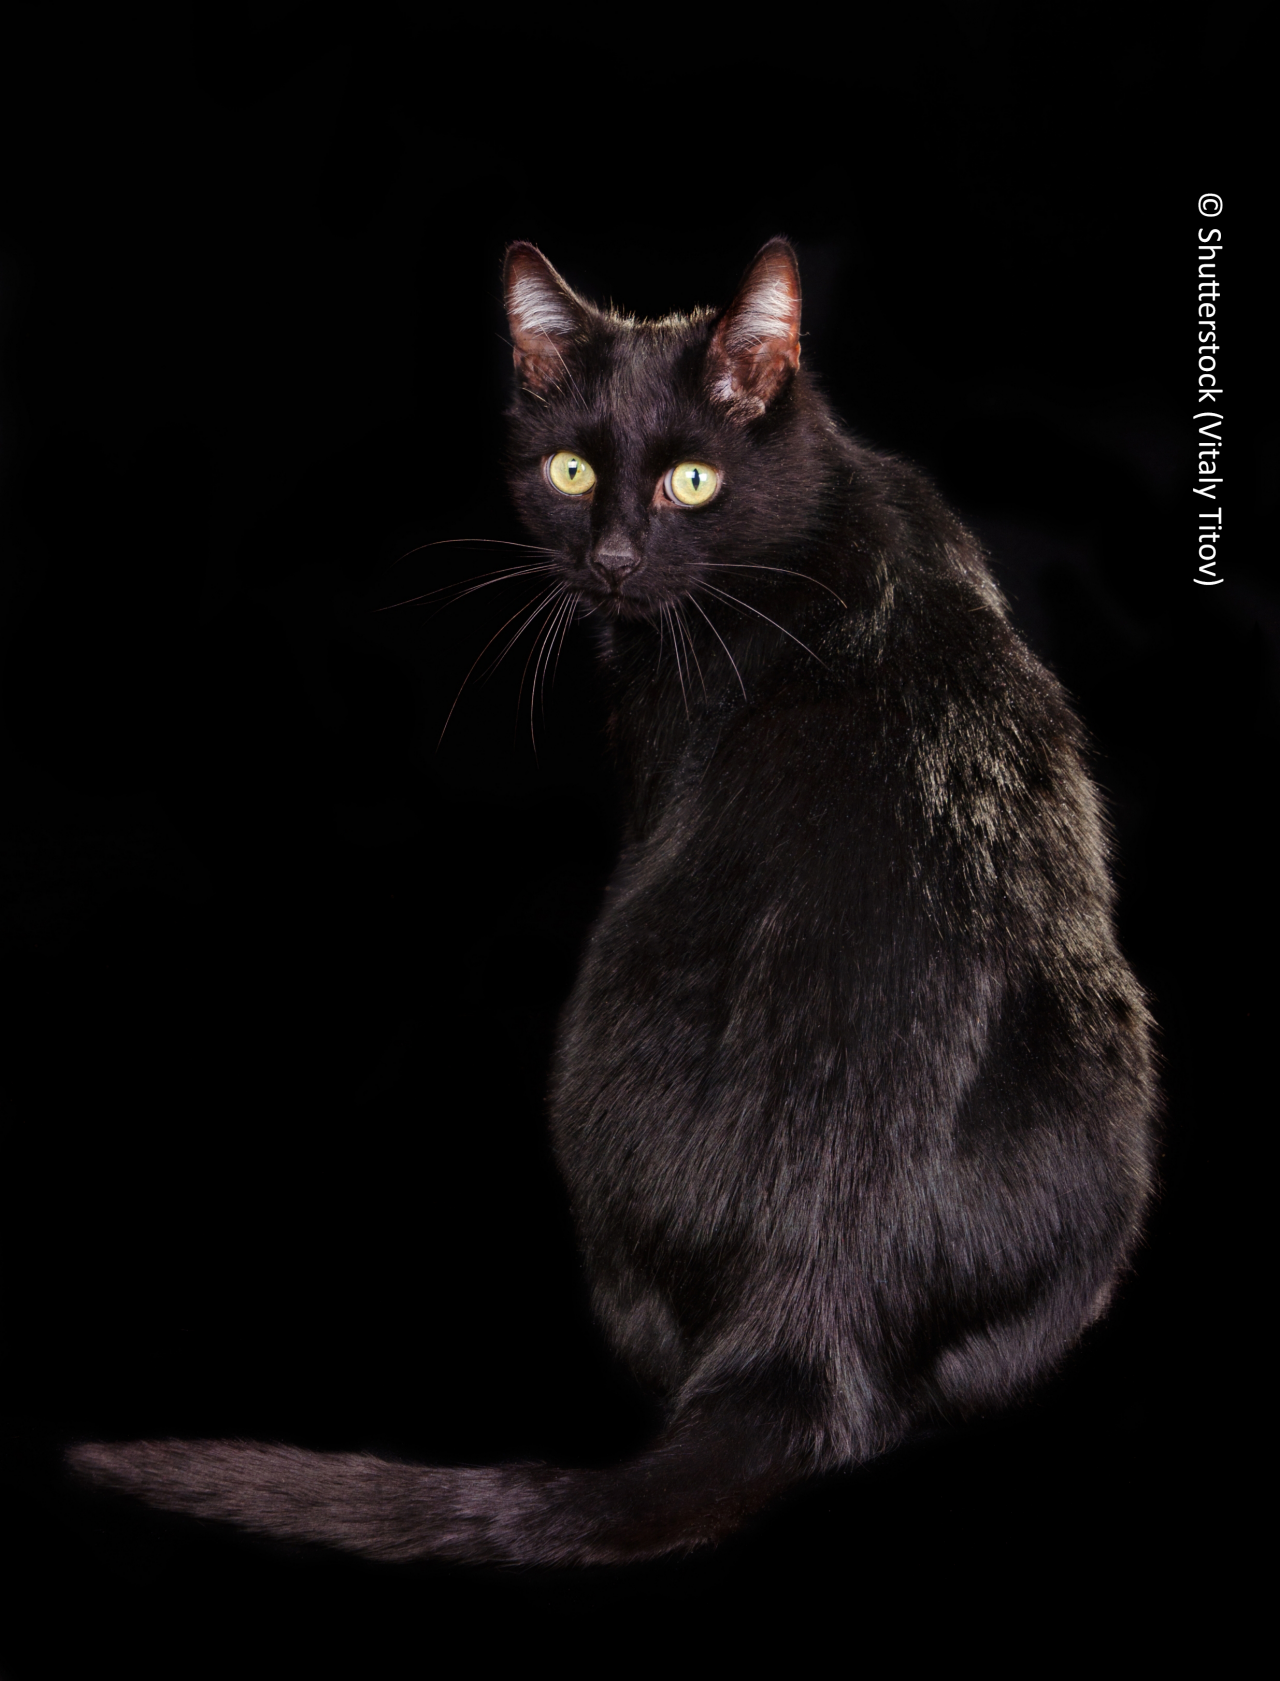 Back view of black cat sitting on black background with face turned to the viewer